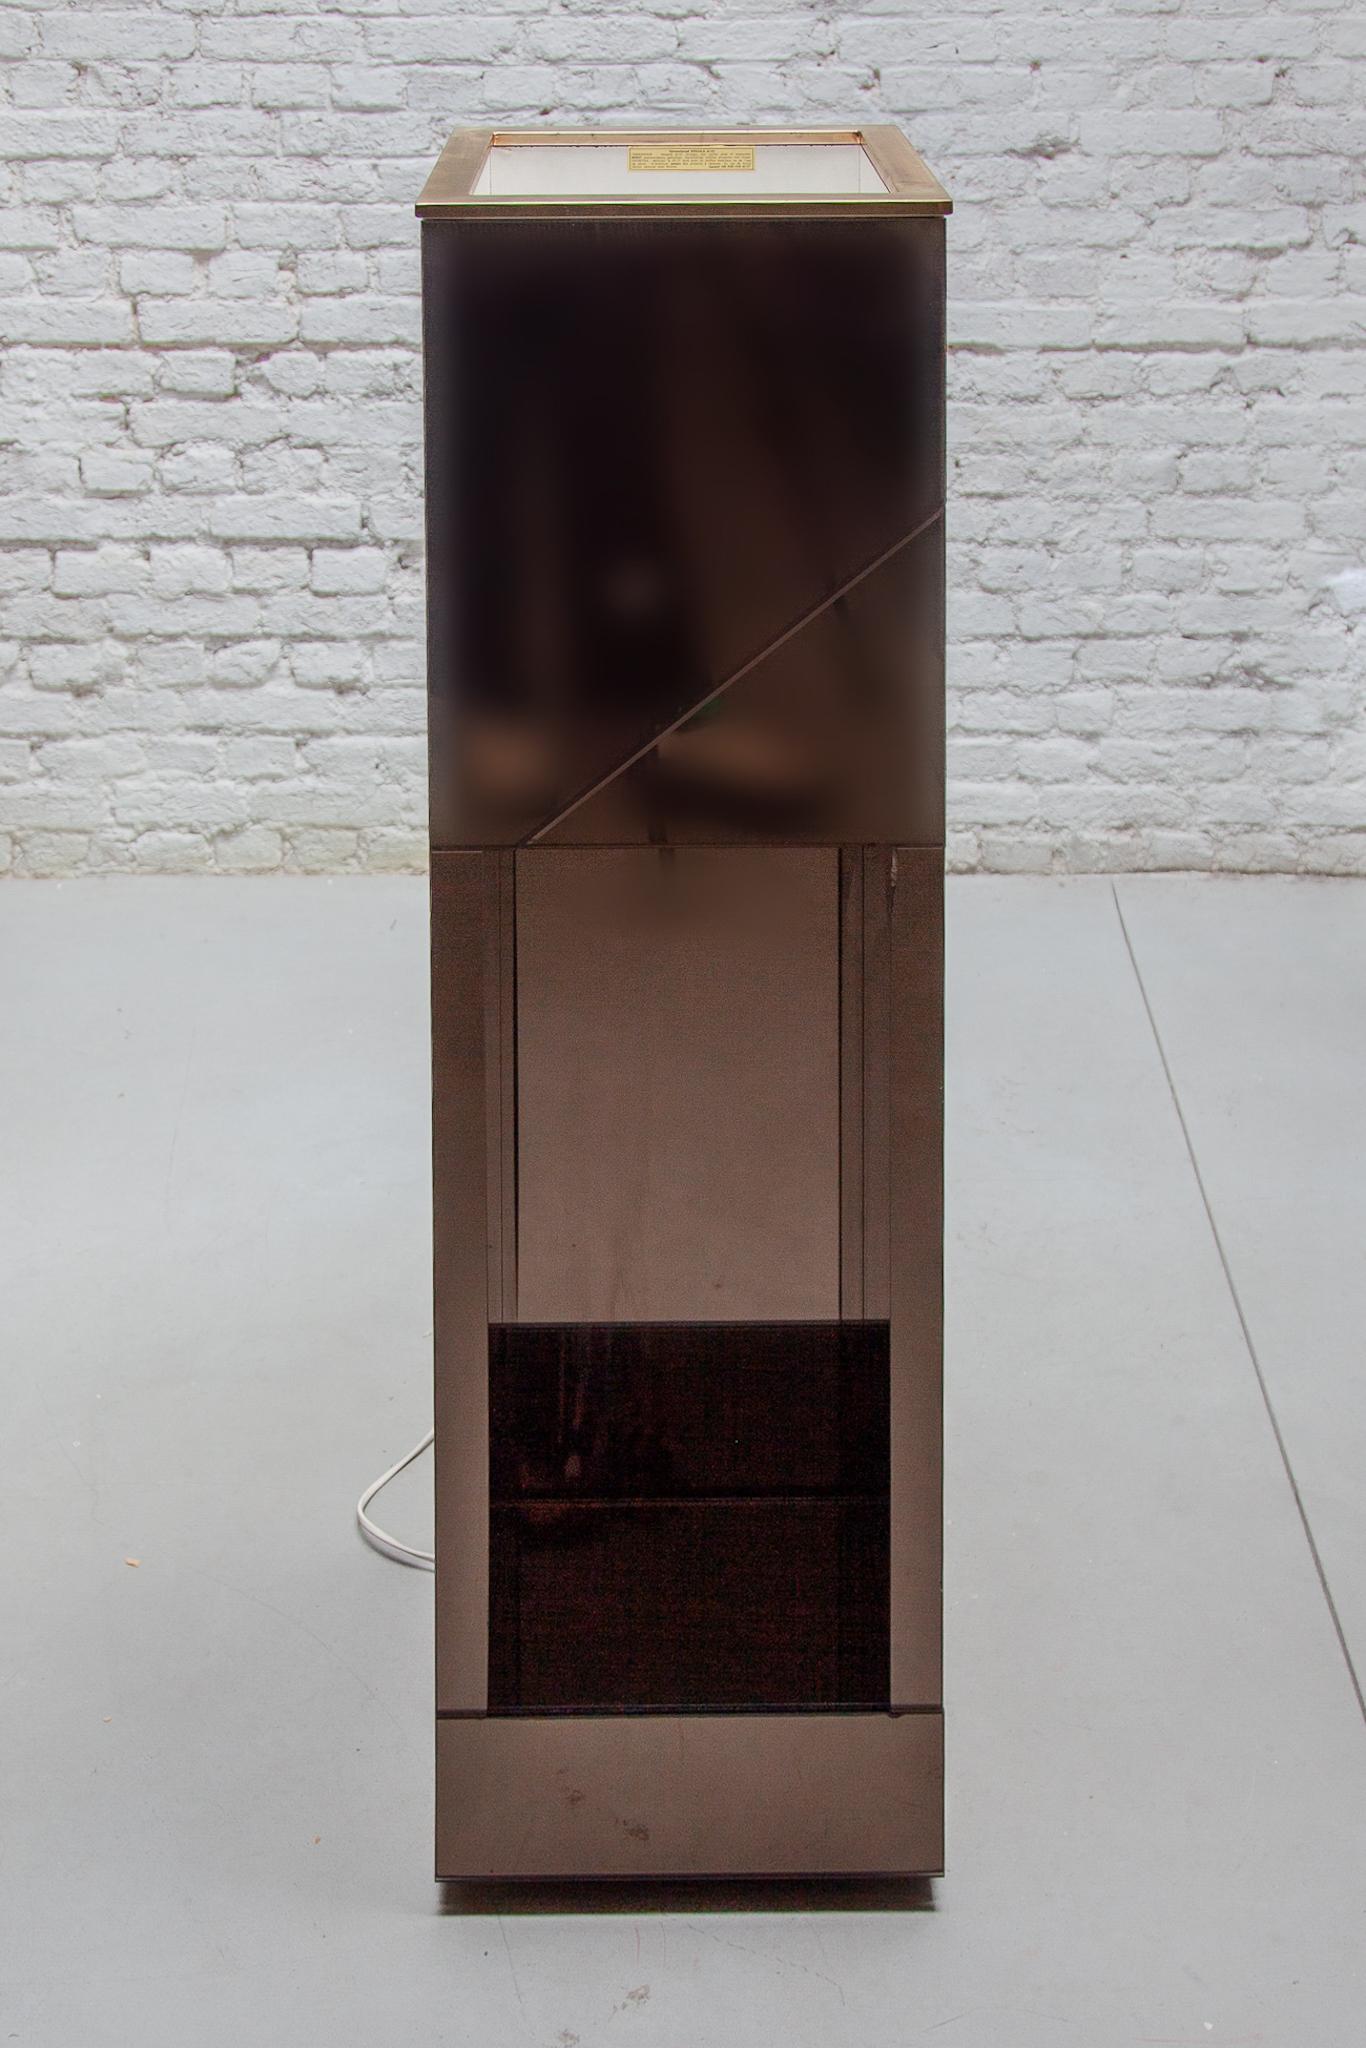 Belgian Smoked Mirrored Planter, Floor Lamp 1970s designed by Belgo chrome For Sale